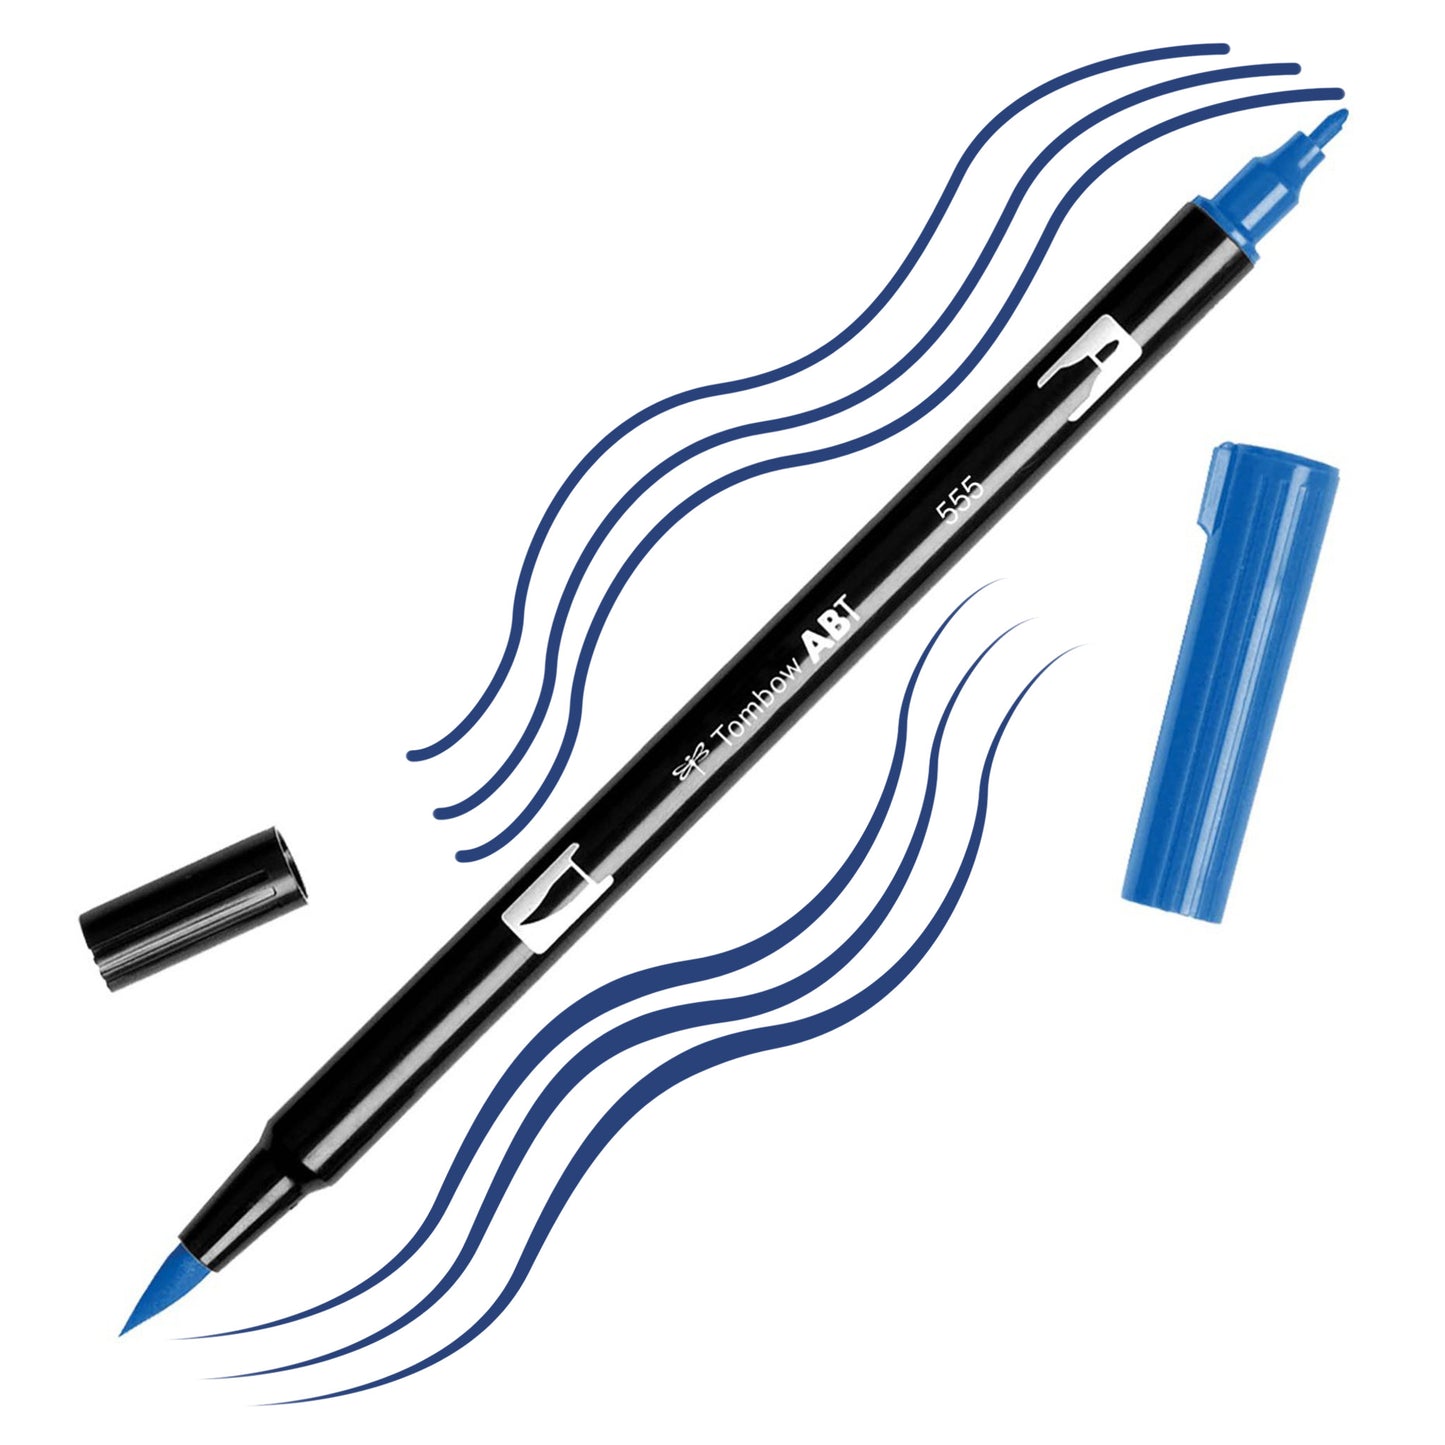 Ultramarine Tombow double-headed brush-pen with a flexible nylon fiber brush tip and a fine tip against a white background with Ultramarine strokes